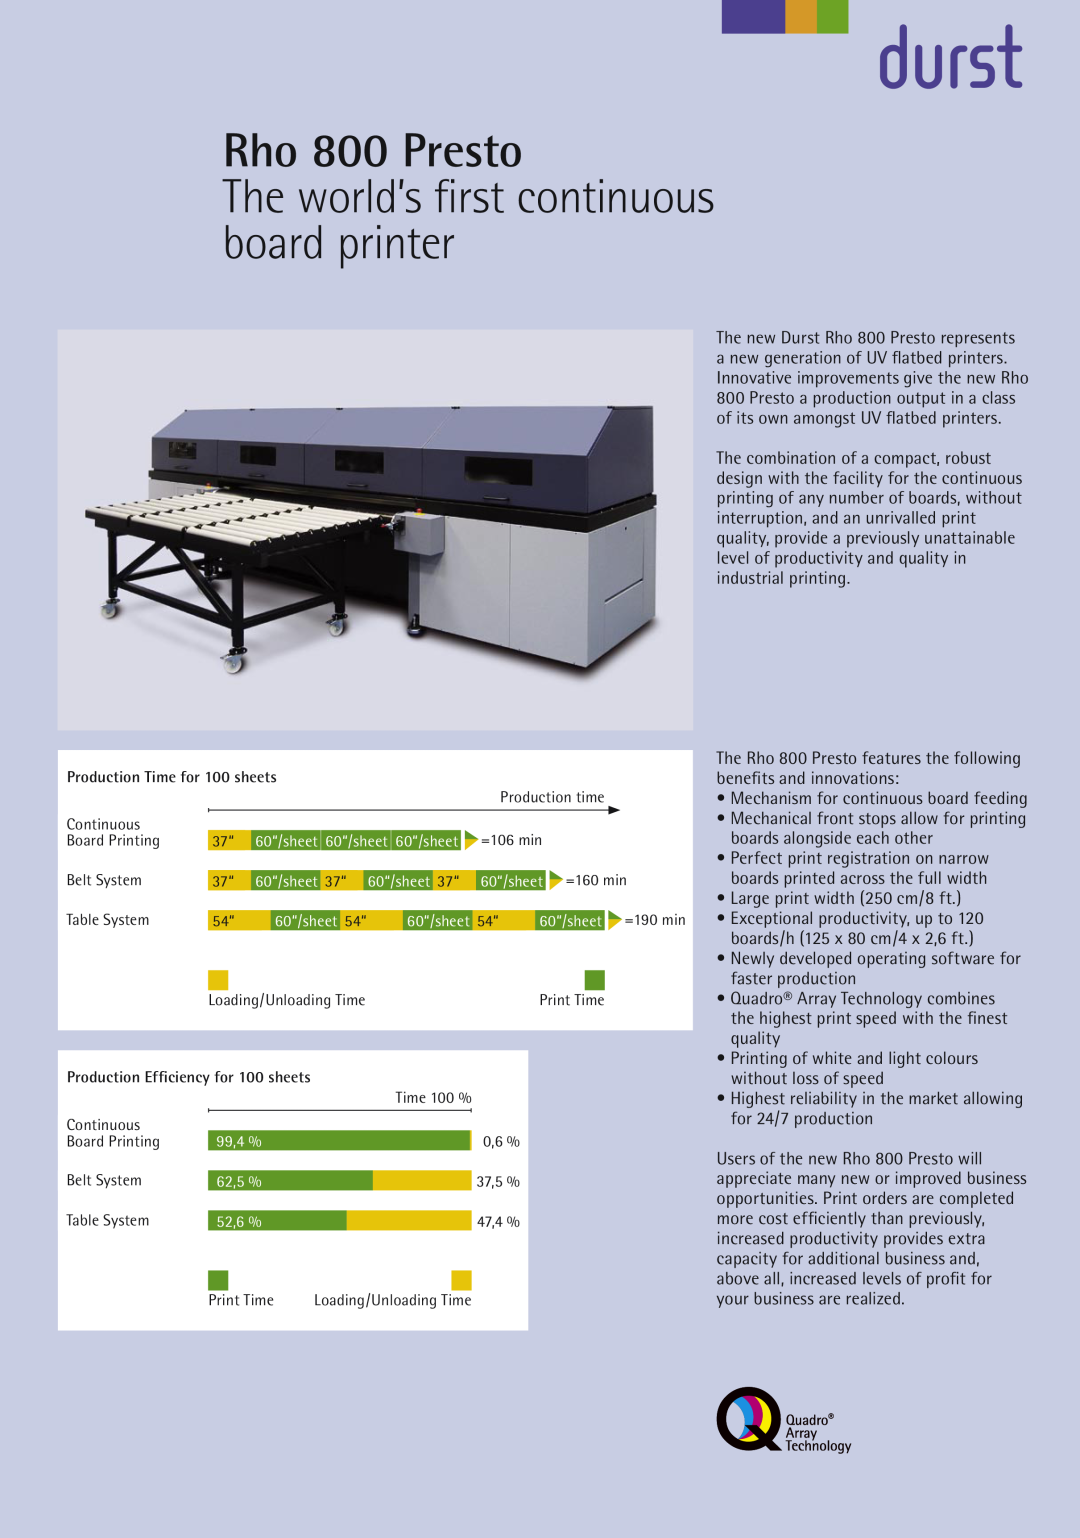 Durst manual Rho 800 Presto, The world’s ﬁrst continuous board printer, Production Time for 100 sheets, 60“/sheet 37“ 